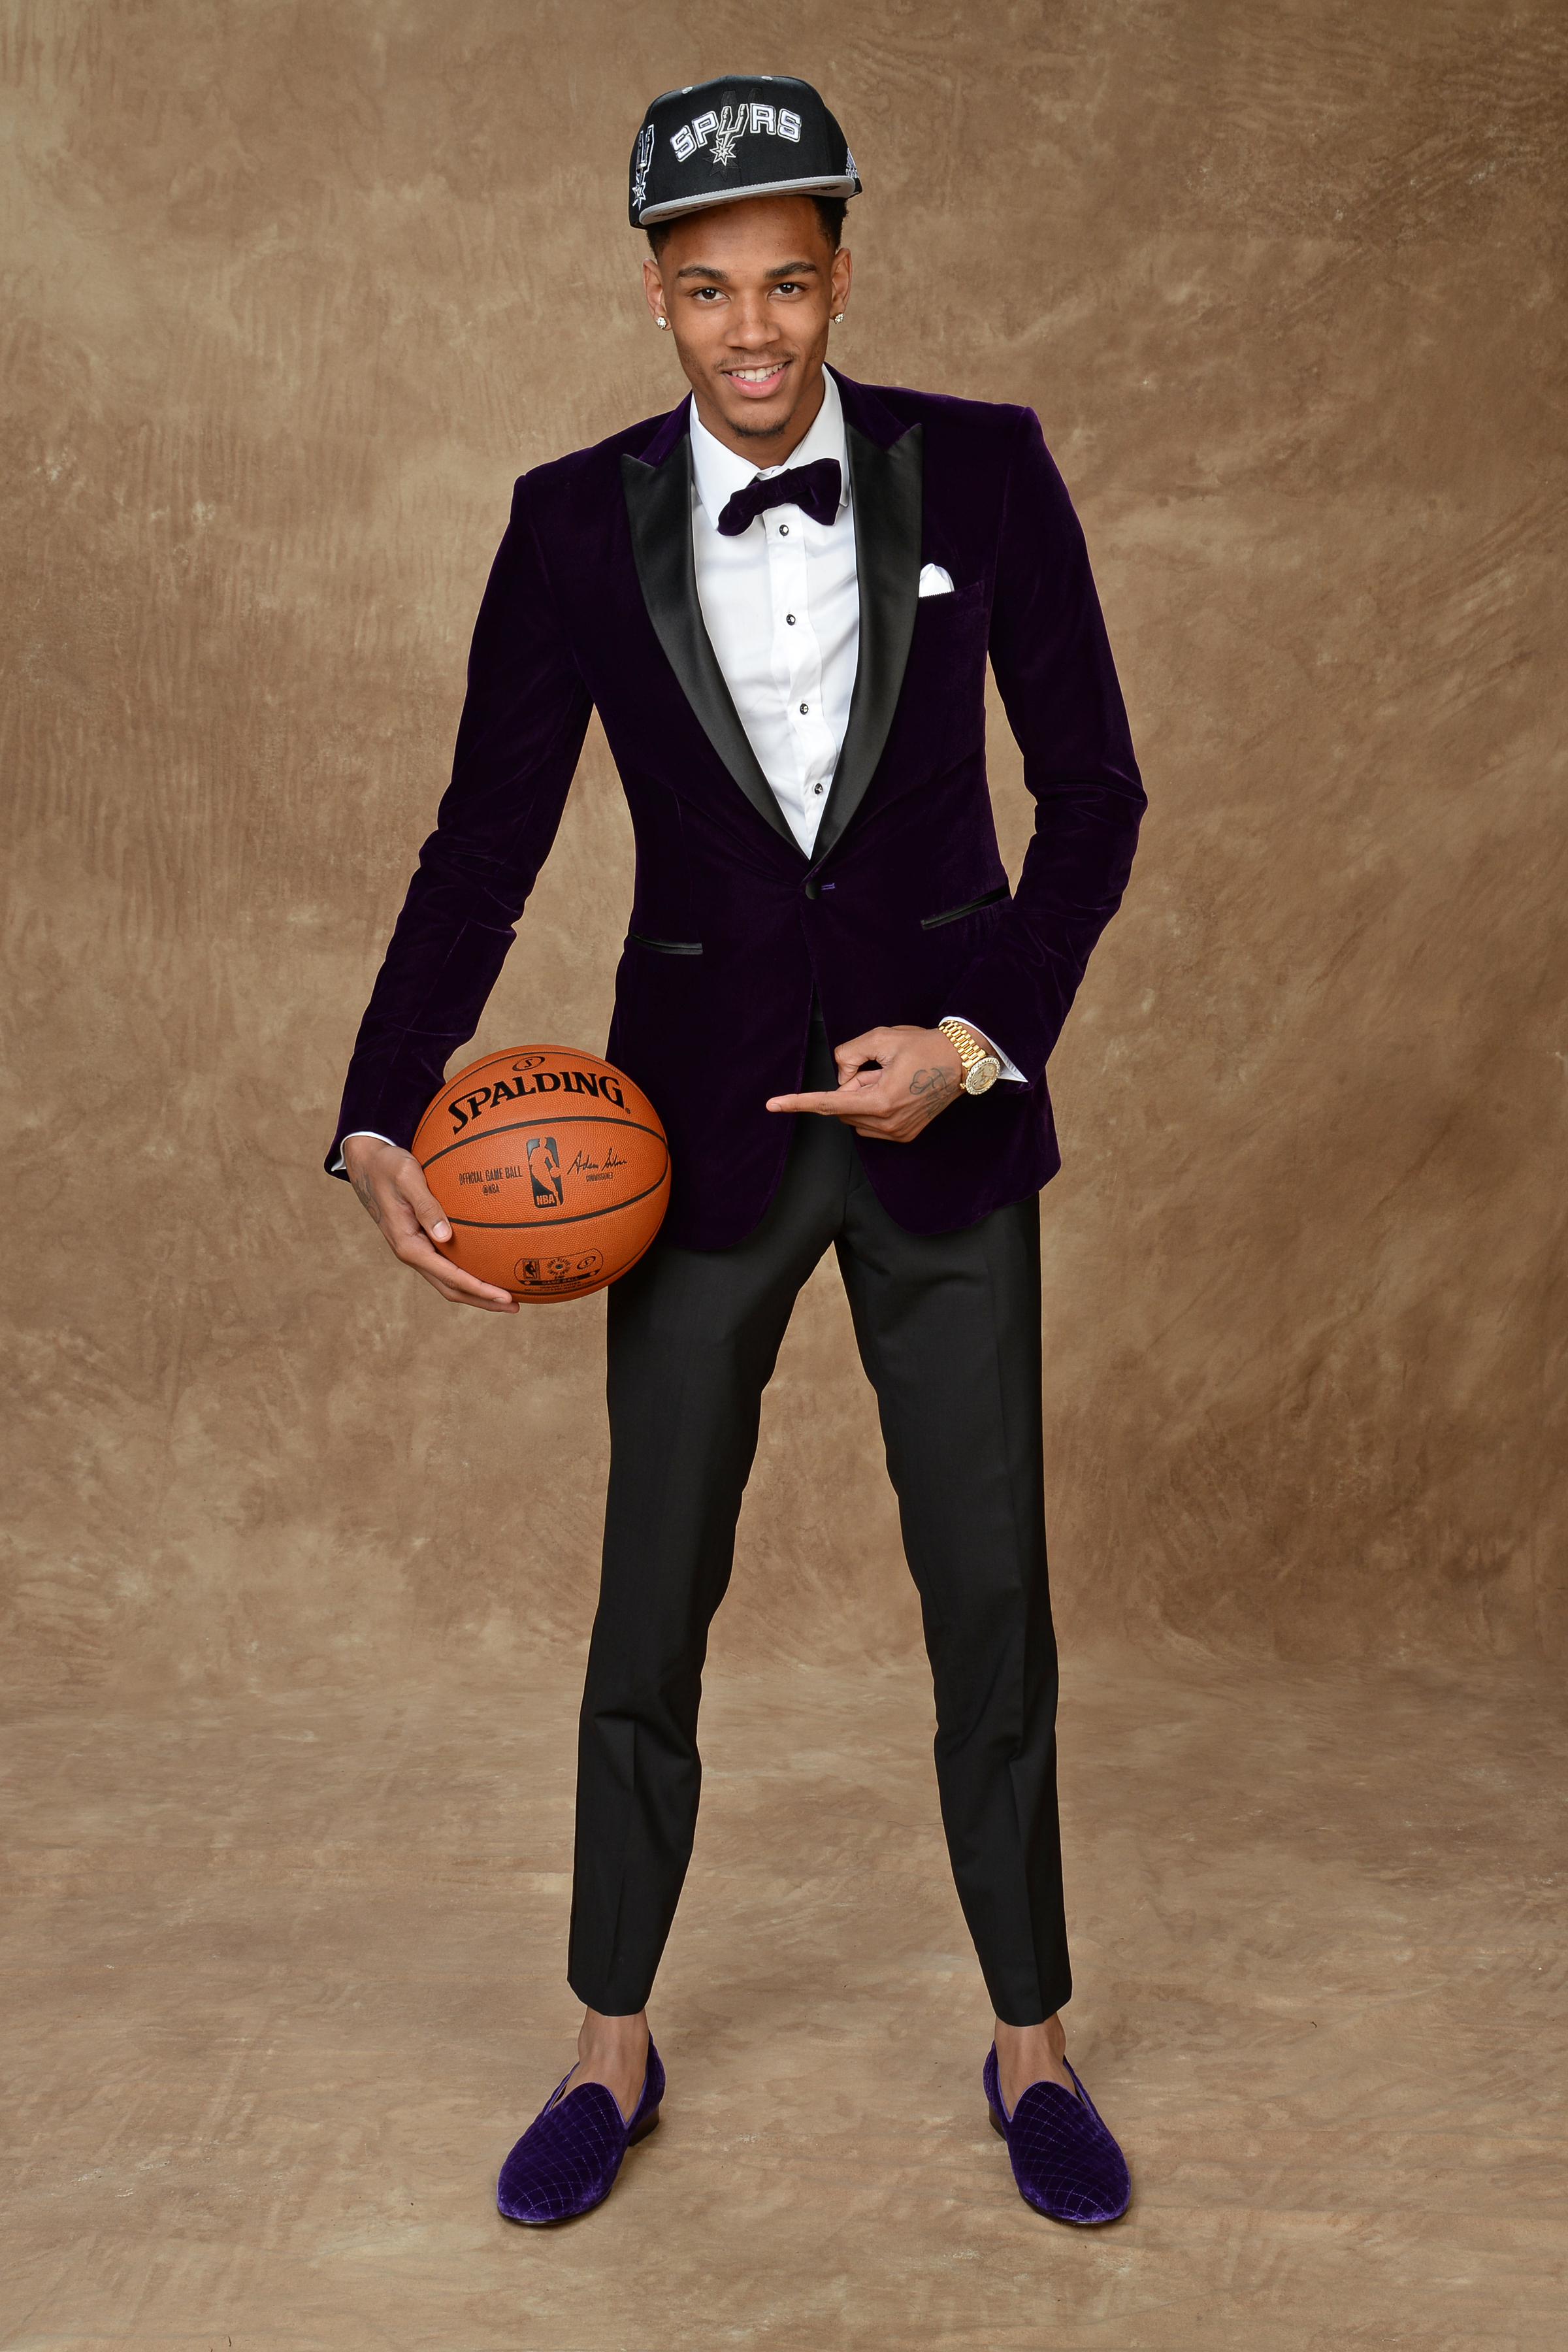 Dejounte Murray opted for a luxurious velvet tuxedo jacket, which he paired with royal purple velvet smoking slippers.